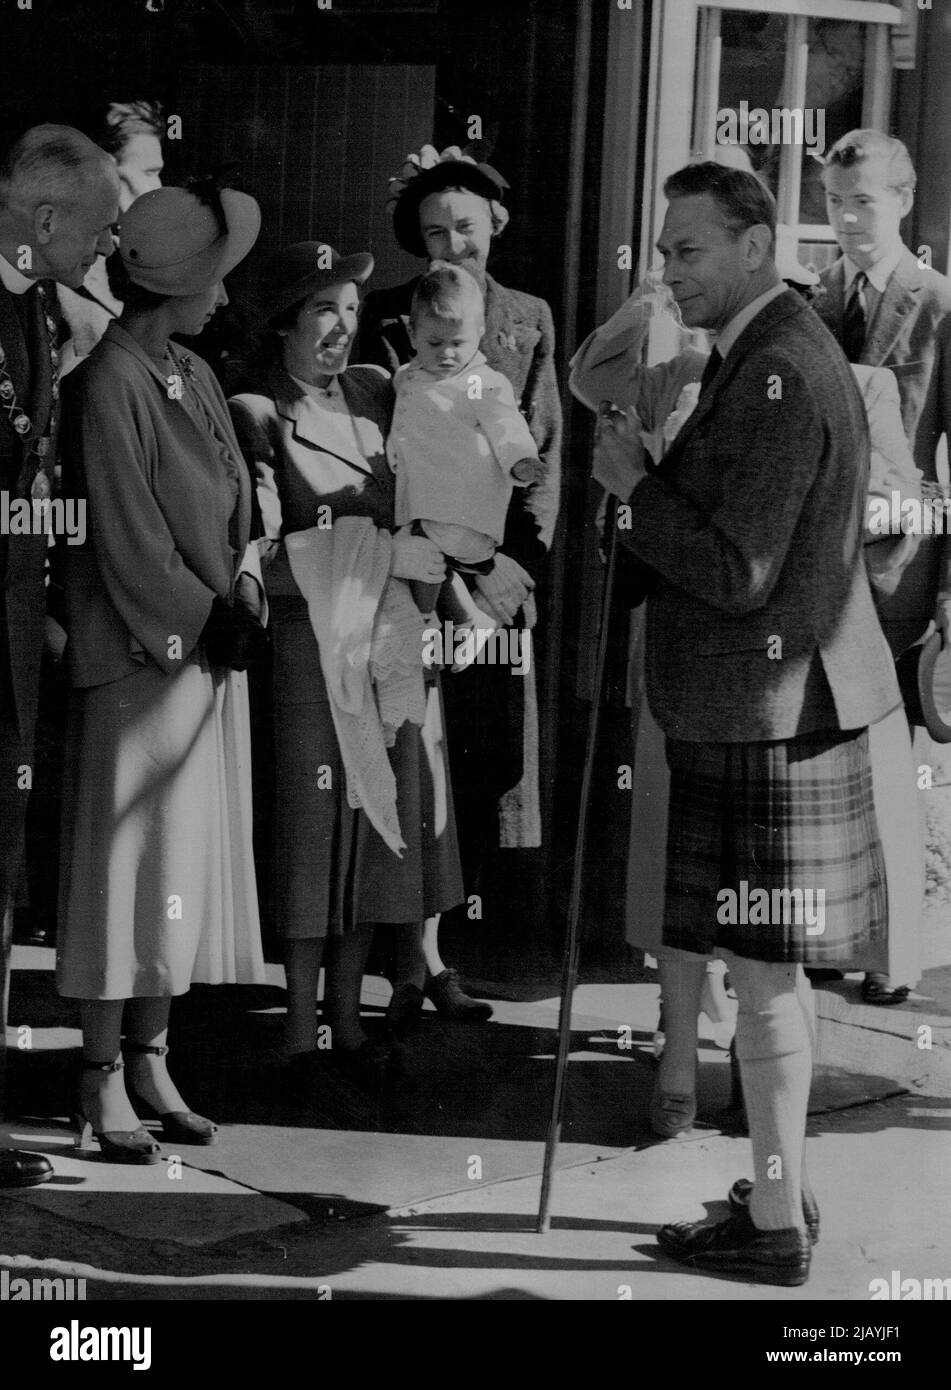 Bonnie Prince Charles Crosses The Border -- Prince Charles makes a grab for his grandfather's stick as his Nurse, Helen Lightbody carries him from Ballater Station. At left is Princess Elizabeth, next to canon W.E. Adams (extreme left) provost of Ballater. (Queen Elizabeth is hidden by the King, others unidentified). Young Prince Charles made a raid across the border between England and Scotland August 6, and captured the hearts of the highlanders who saw him for the first time since his birth nearly a year ago. With his mother, Princess Elizabeth, aunt Princess Margaret and grandparents, King Stock Photo